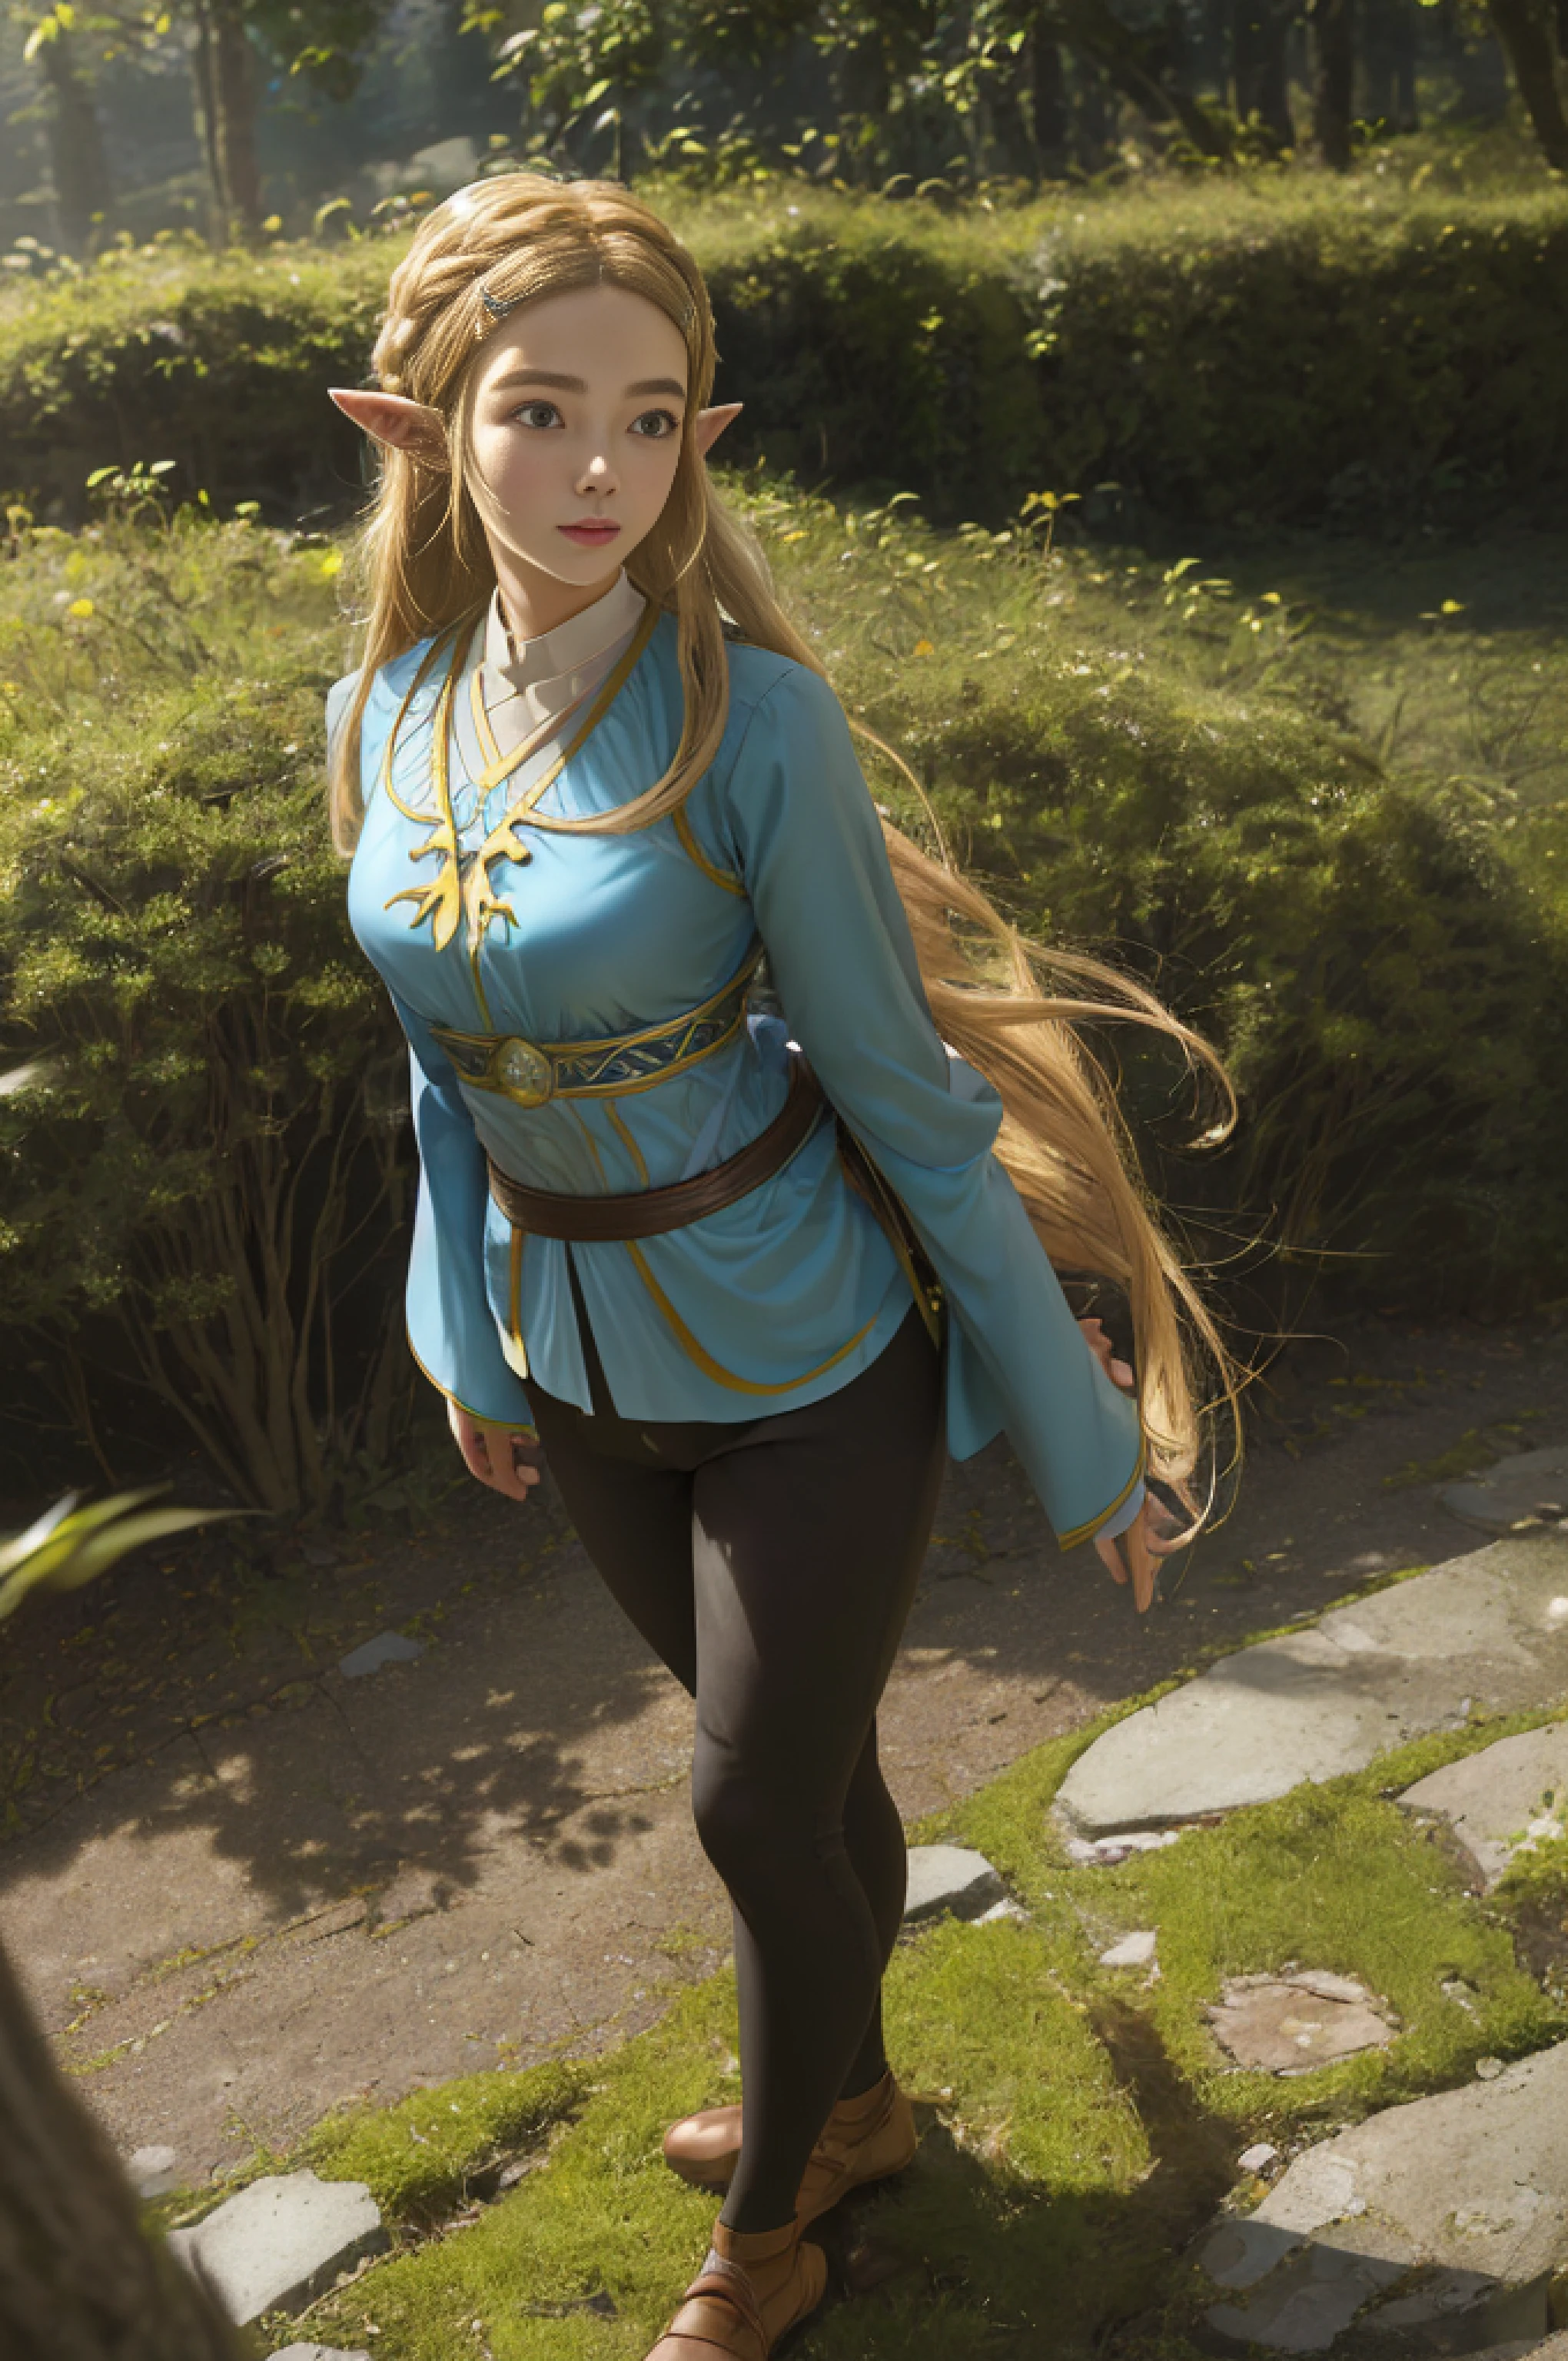 8k, raw camera, highres, detailed, masterpiece, portrait, photorealistic, hyperrealist, aesthetic, beautiful, best quality, highly detaile, best quality clothing, aesthetic clothings, professional angle, rule of thirds, Feminine, delicate, beautiful, 19 years, attractive Japanese, (solo), 1 girl, (Princess Zelda, Botw), (In Outdoors), ((Full Body)), ((From Front) Shallow Depth of Field), -, ((Normal)), (Semi Long Hair, Blonde Hair), (Loose Hair, Braid, - Hair), ((HairClips, Pointy Ears)), (- Eyes, Open Eyes, Cheerful Gaze), (-, Arms Down, Hands Down), ((Standing), Closed Mouth), -, -, (Average Bust), ((-, Black Pants)), (-, -), (Leather), beautiful body, beautiful eyes, shiny eyes, shiny hair, beautiful mouth, beautiful lips, beautiful skin, beautiful face